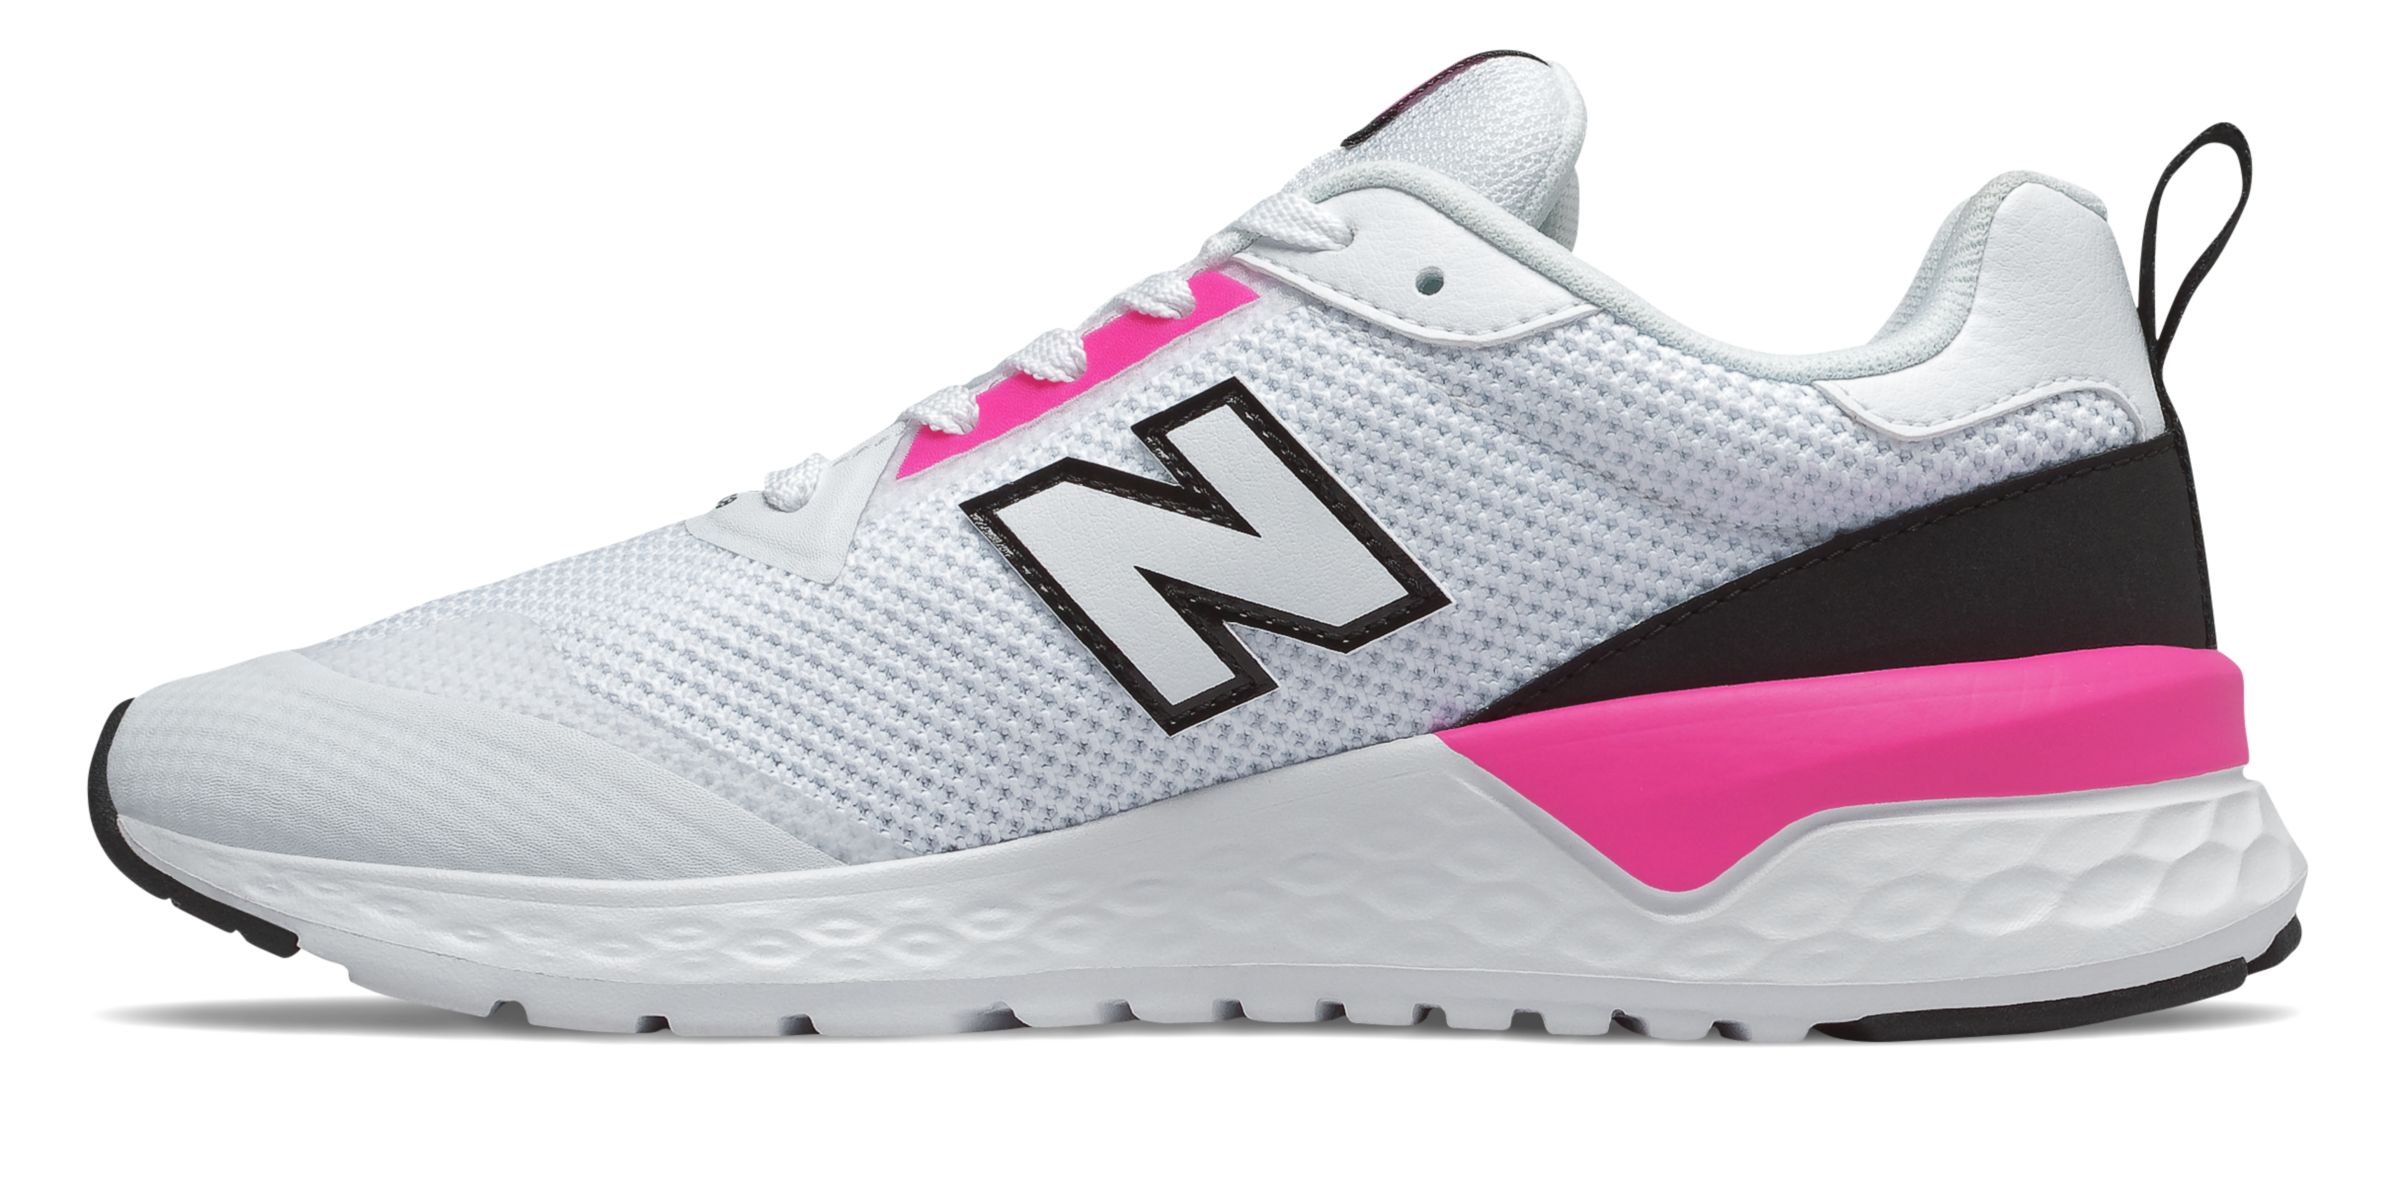 Daily Discounts on New Balance Shoes 